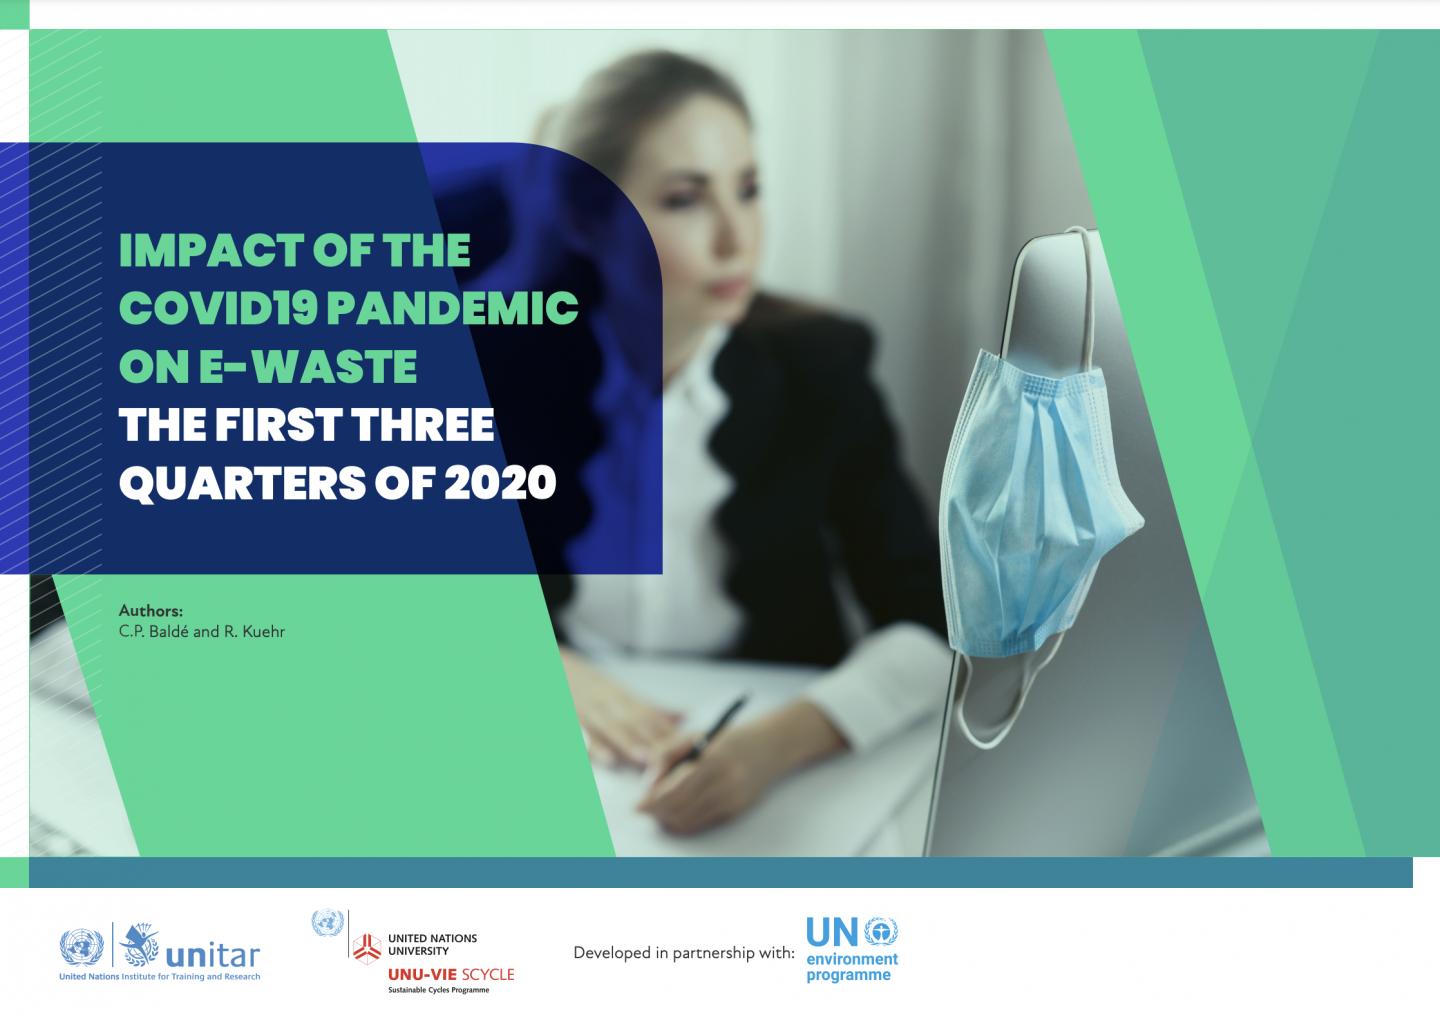 The UN report, "The Impact of the COVID-19 Pandemic on E-waste in the First Three Quarters of 2020"